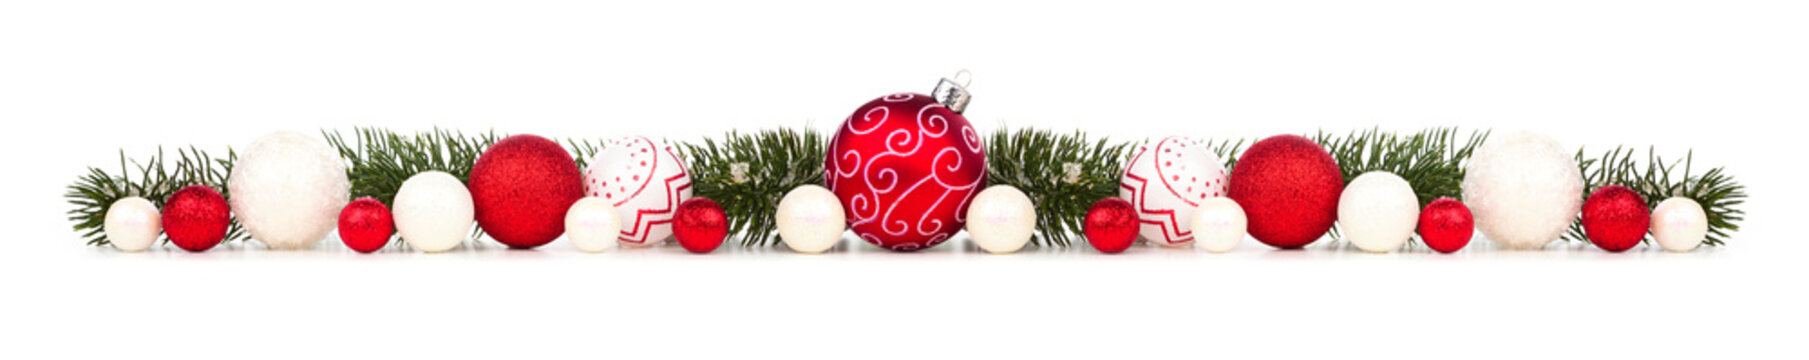 Long Christmas border of red and white ornaments and branches isolated on a white background